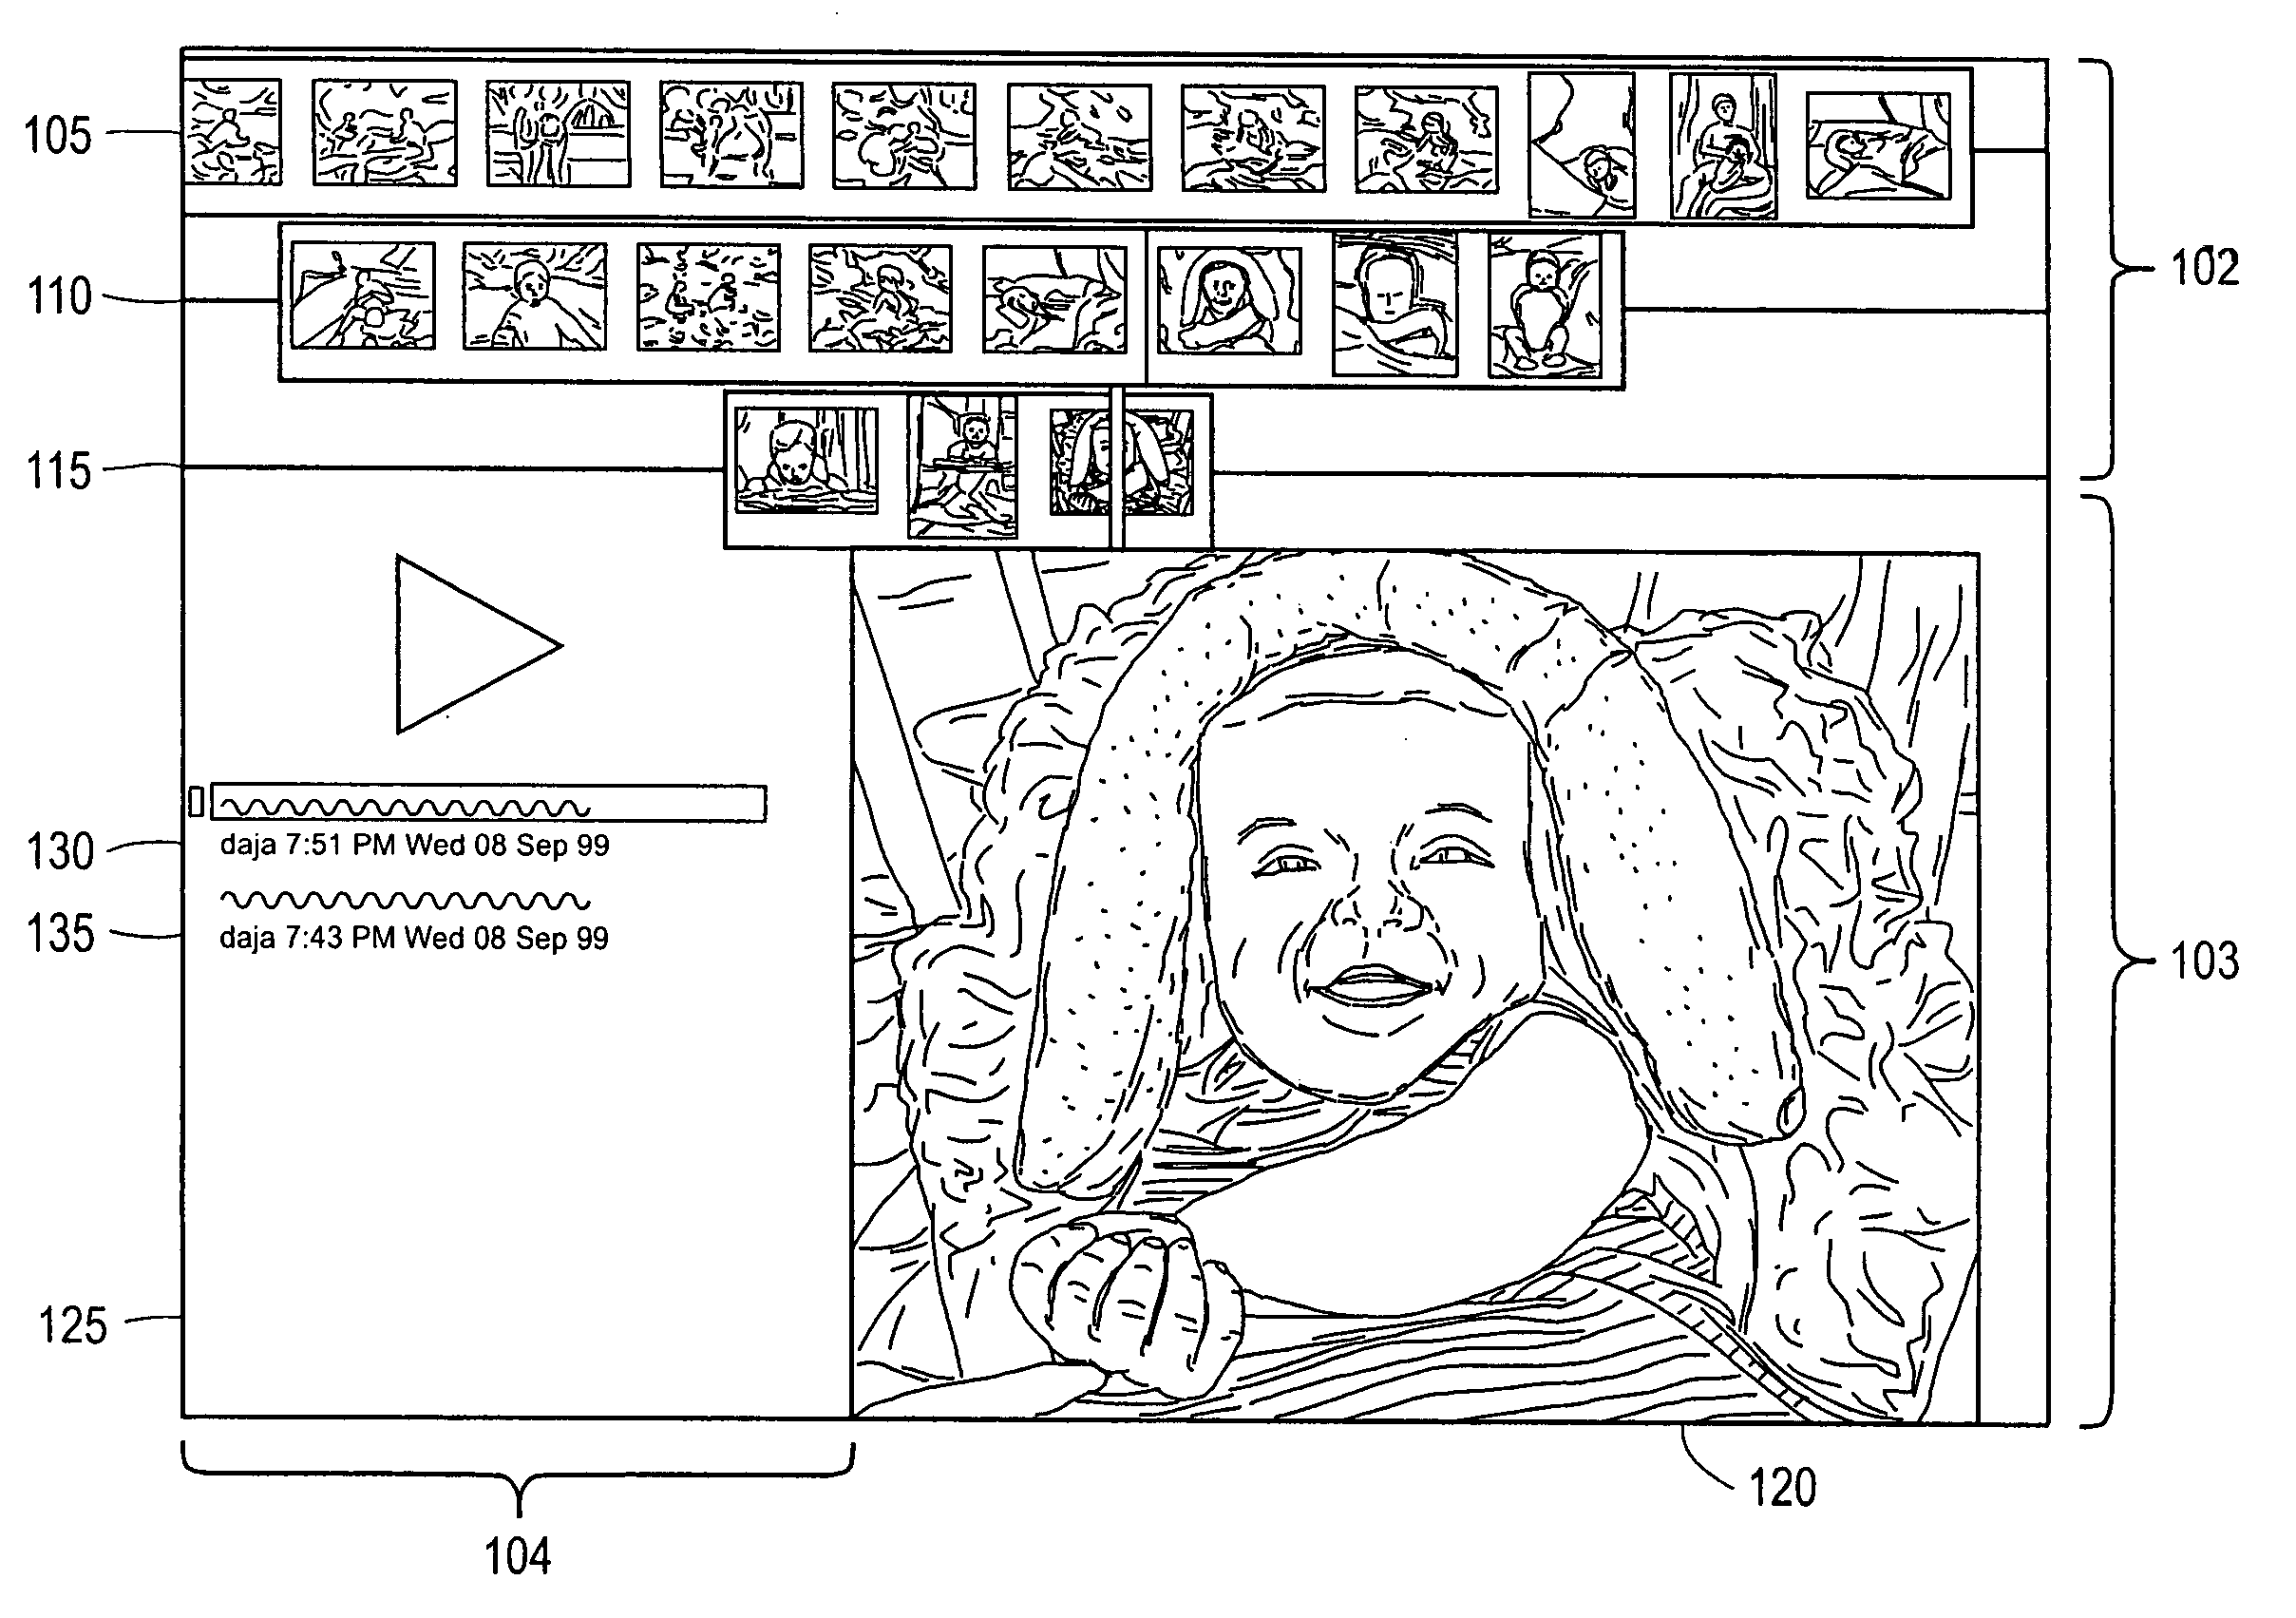 Method and apparatus for storytelling with digital photographs